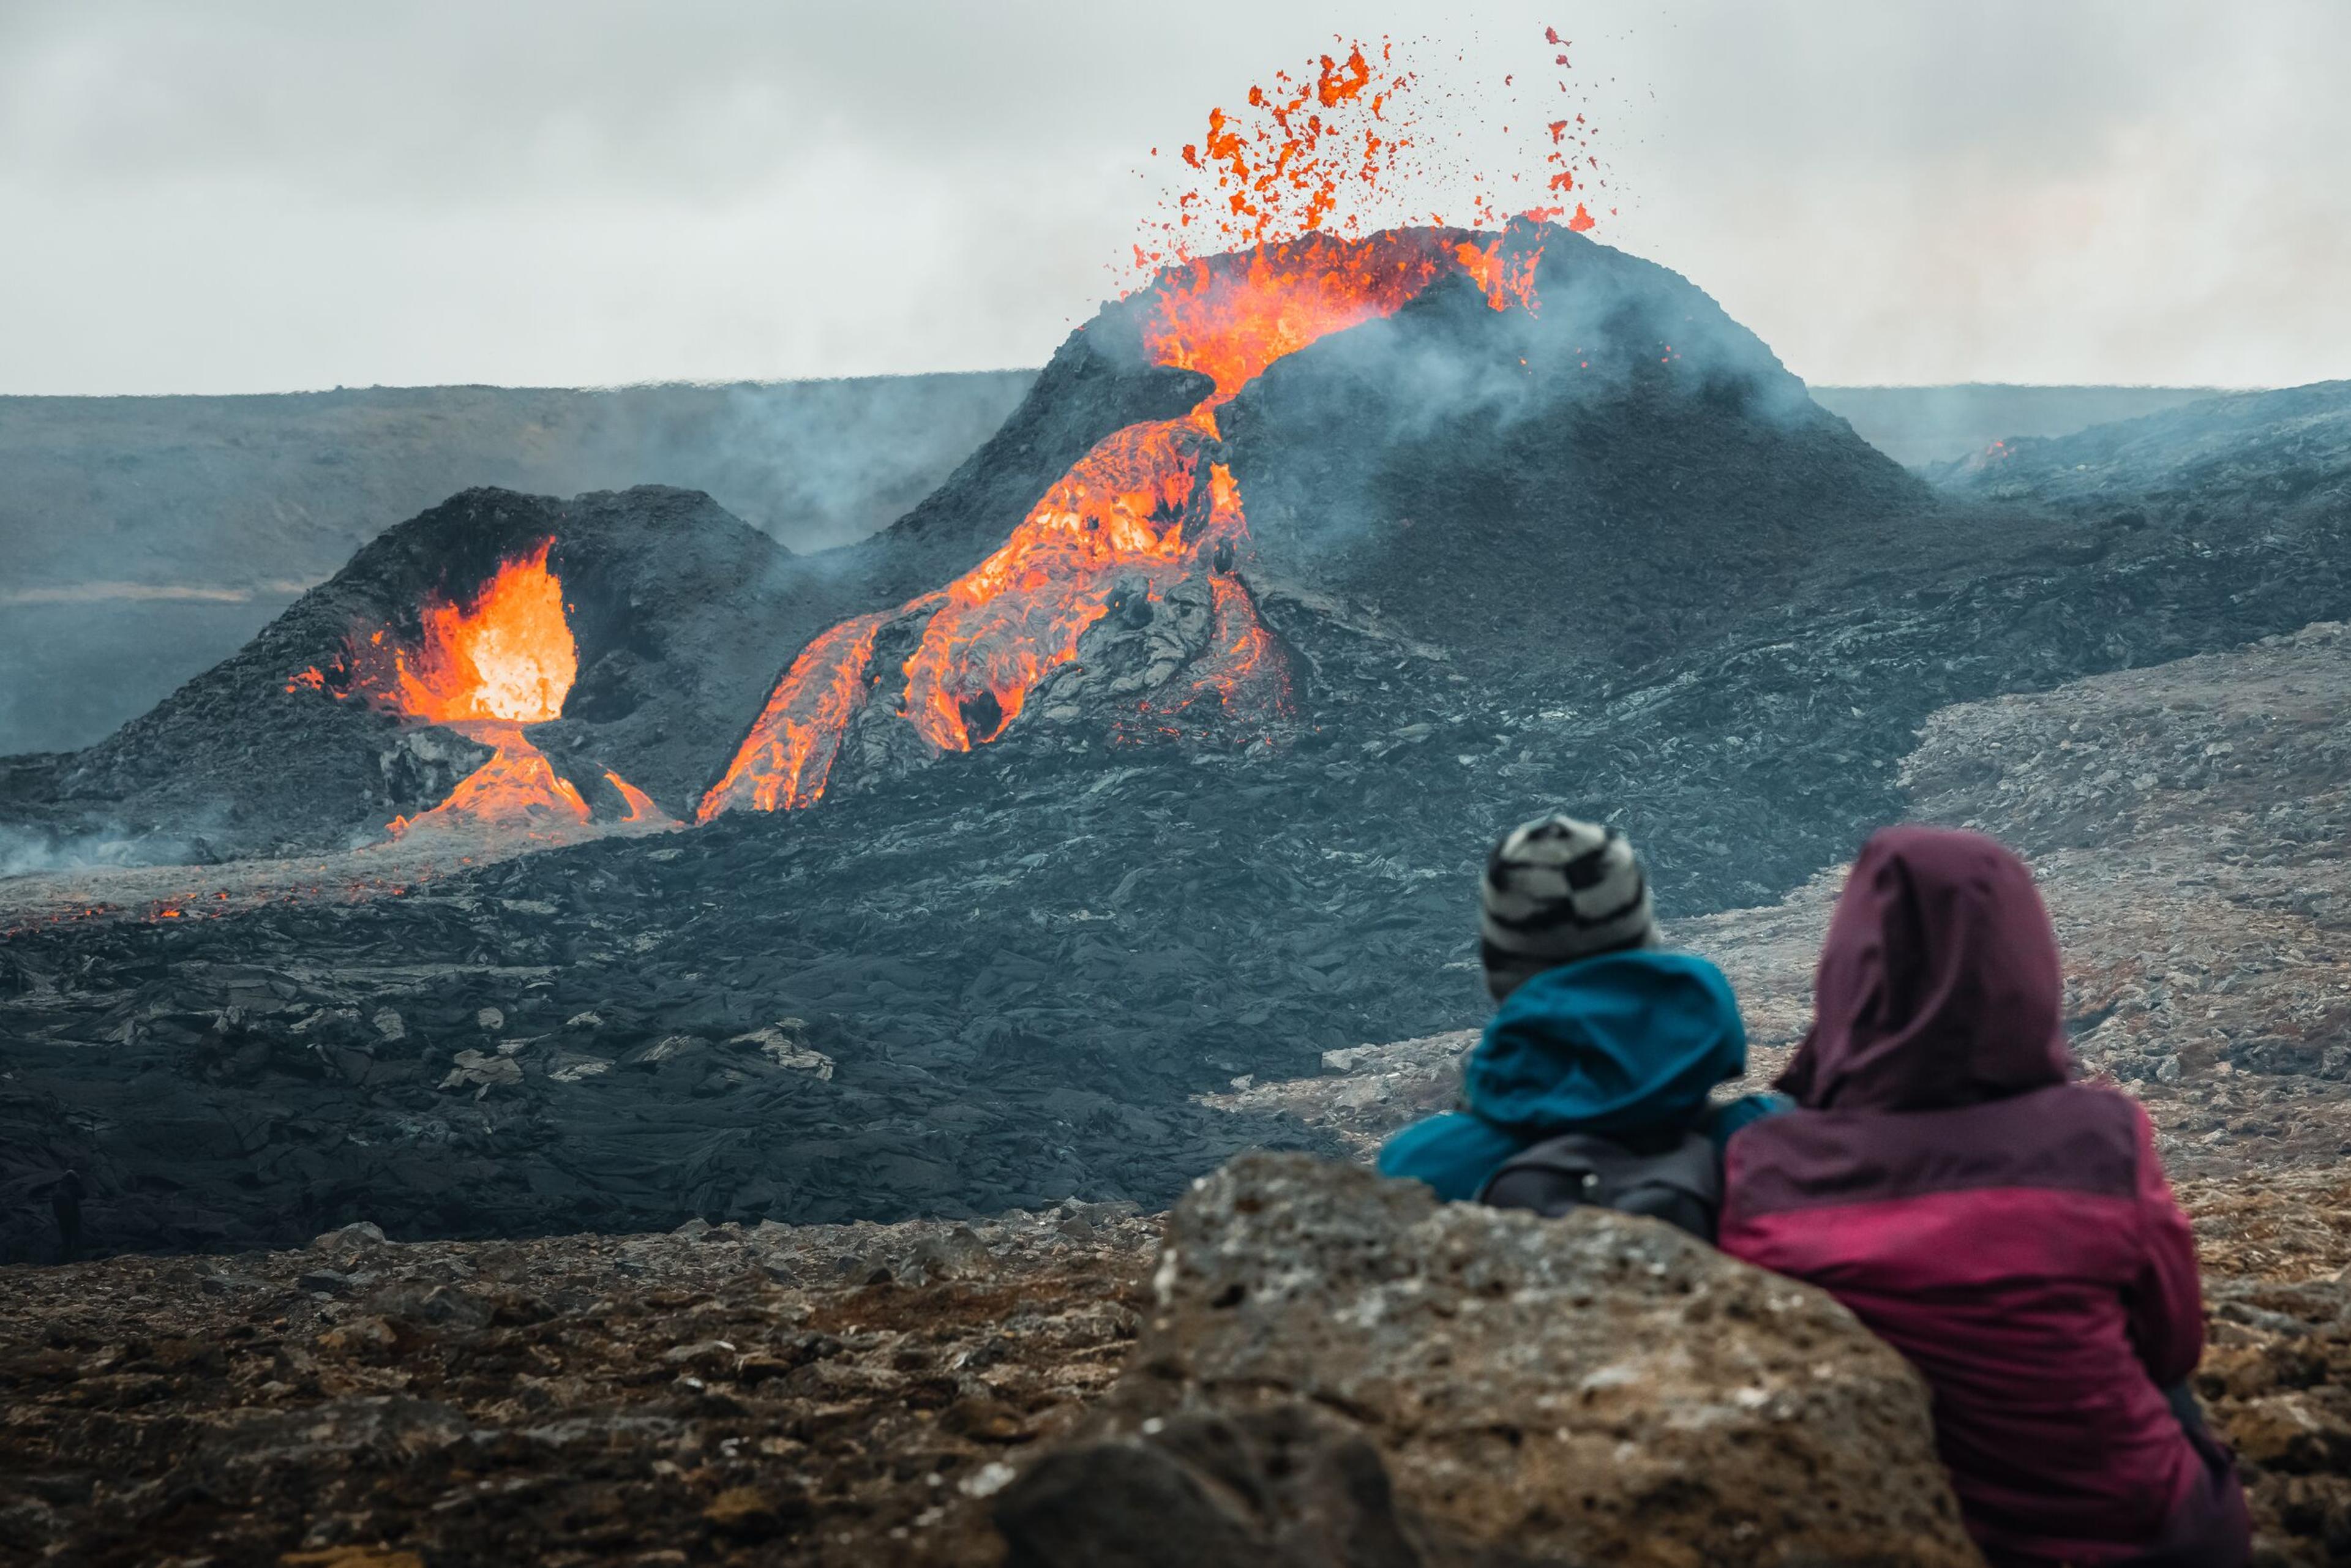 Visitors trekking across the rugged terrain of an Icelandic lava field, with an active volcano in the background erupting, spewing lava and ash into the air, a dynamic scene of nature's power.